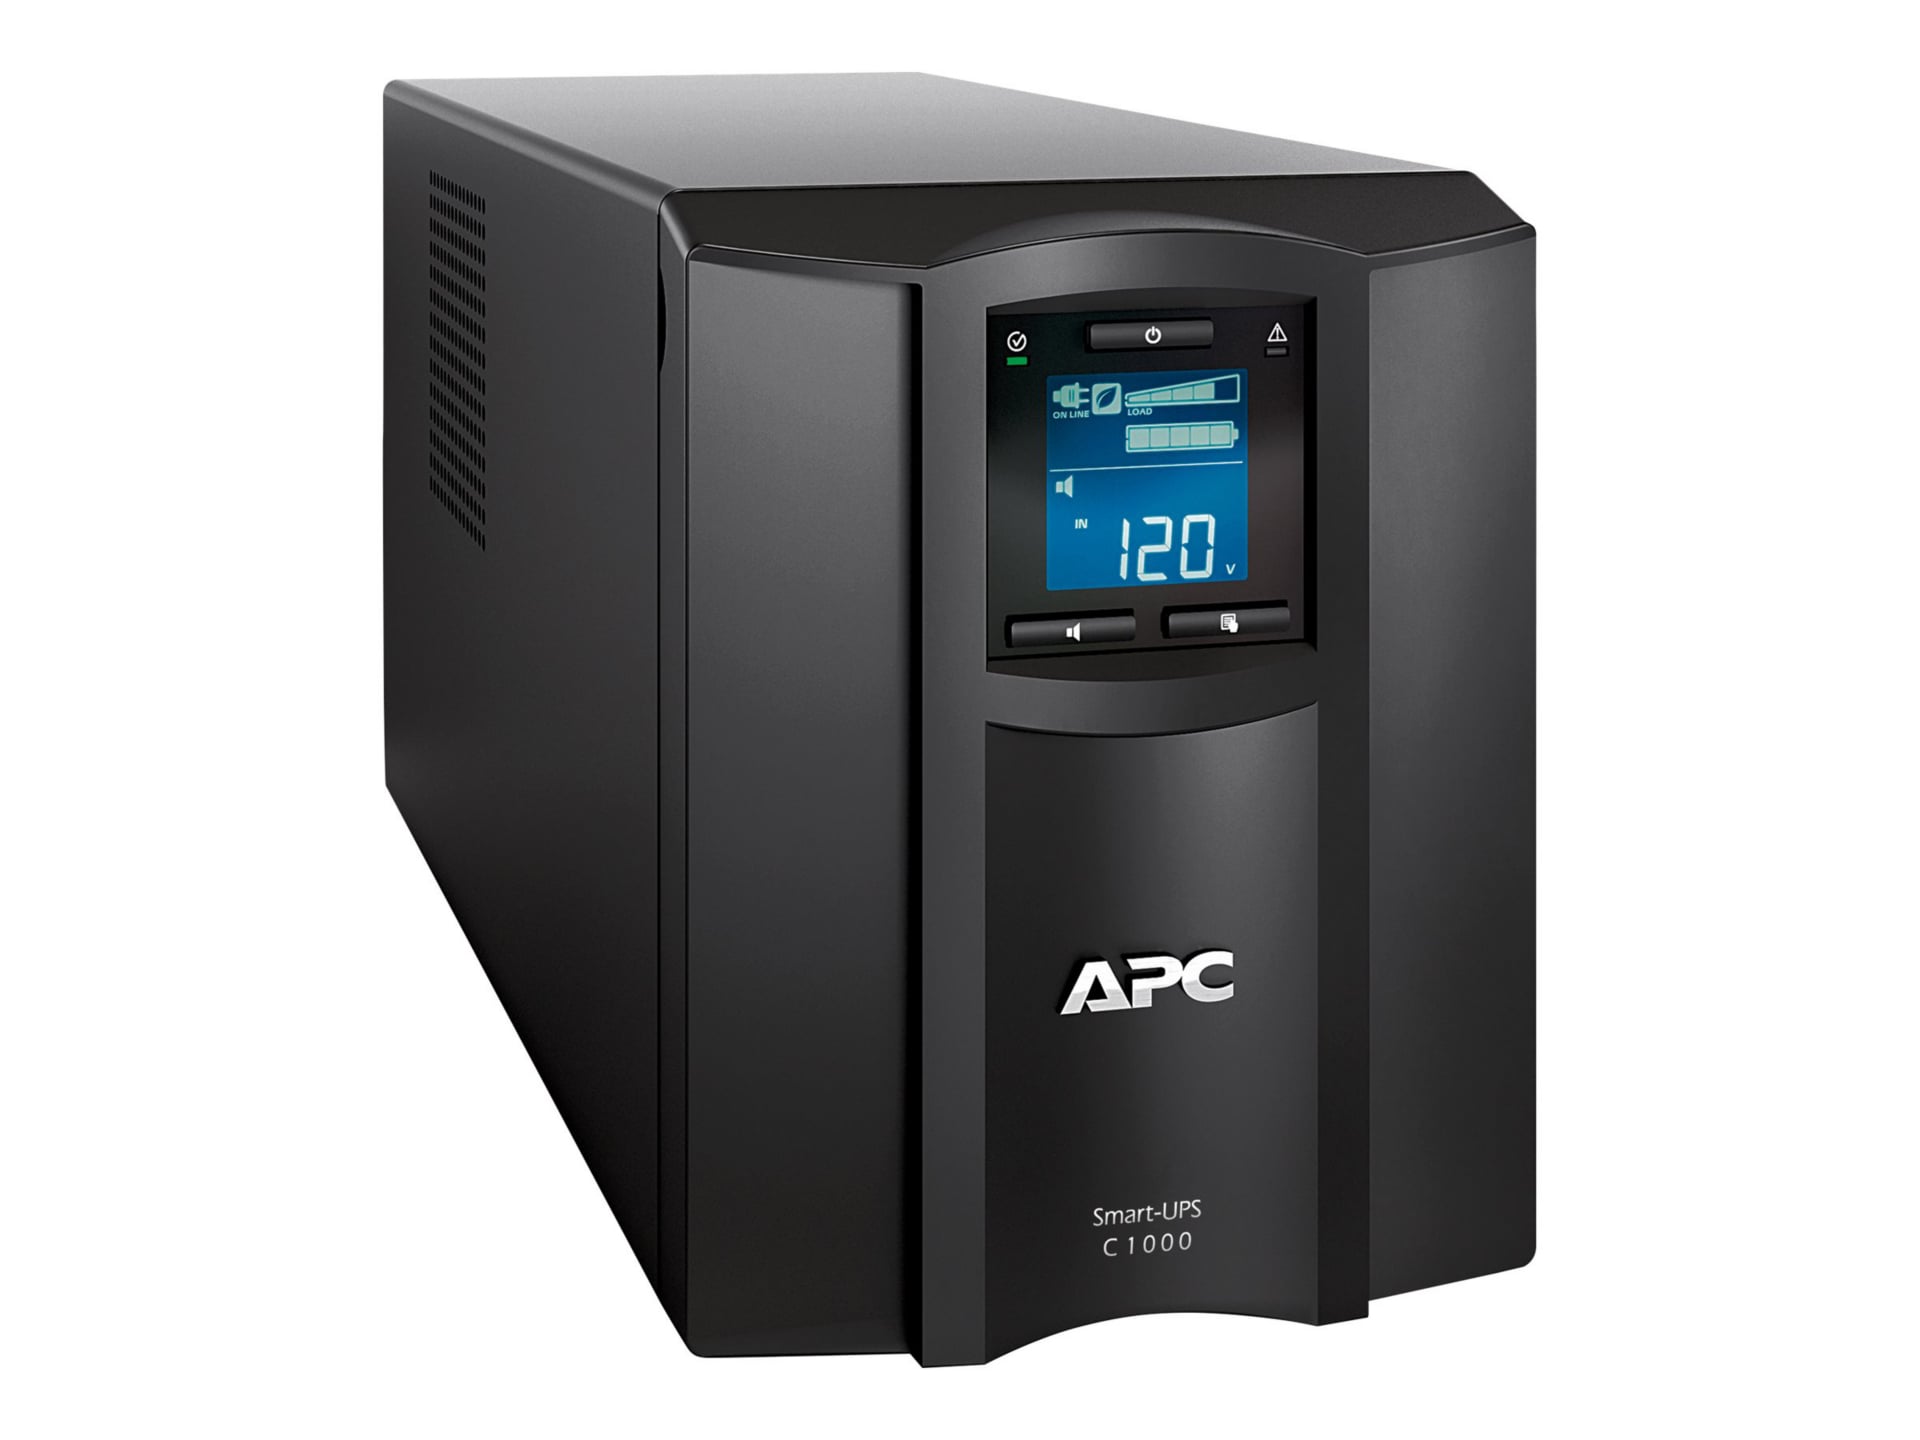 APC by Schneider Electric Smart-UPS C 1000VA LCD 230V with SmartConnect